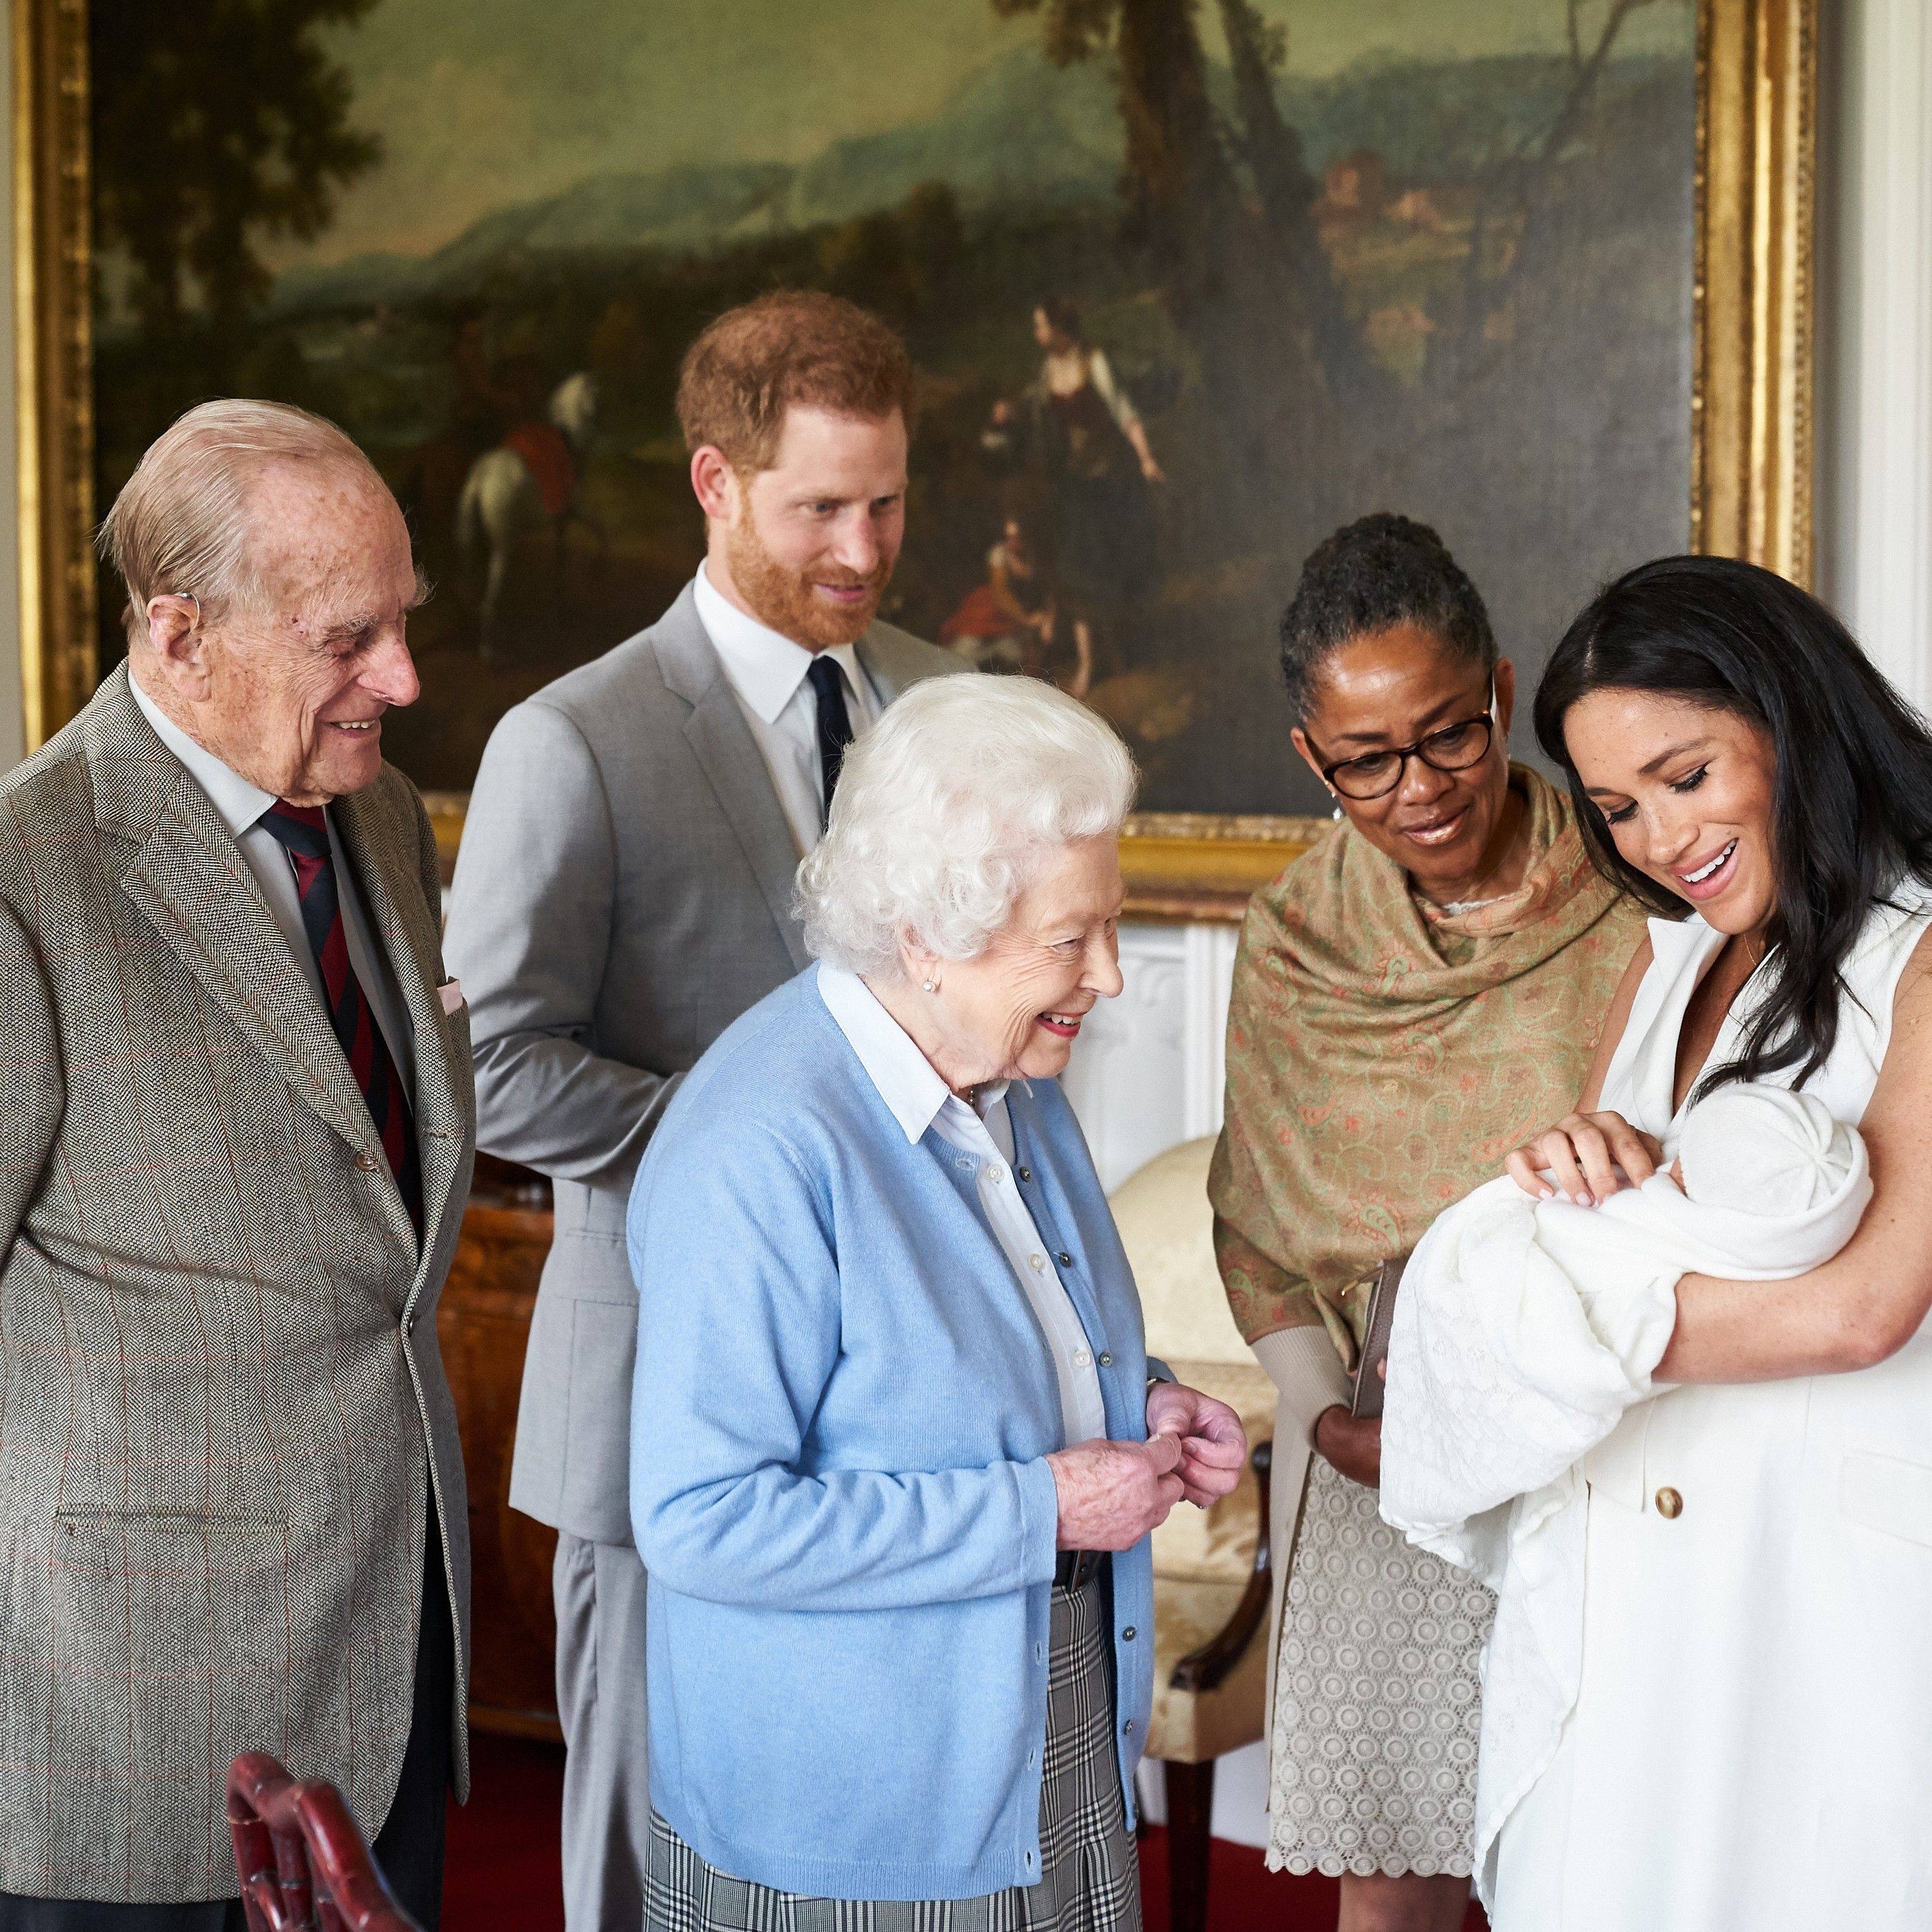 Britain’s Prince Harry, Duke of Sussex, and his wife Meghan, Duchess of Sussex, accompanied by Meghan’s mother Doria Ragland, showing their newborn baby son, Archie Harrison Mountbatten-Windsor to Britain’s Queen Elizabeth and Britain’s Prince Philip, Duke of Edinburgh, at Windsor Castle in May 2019. Photo: AFP